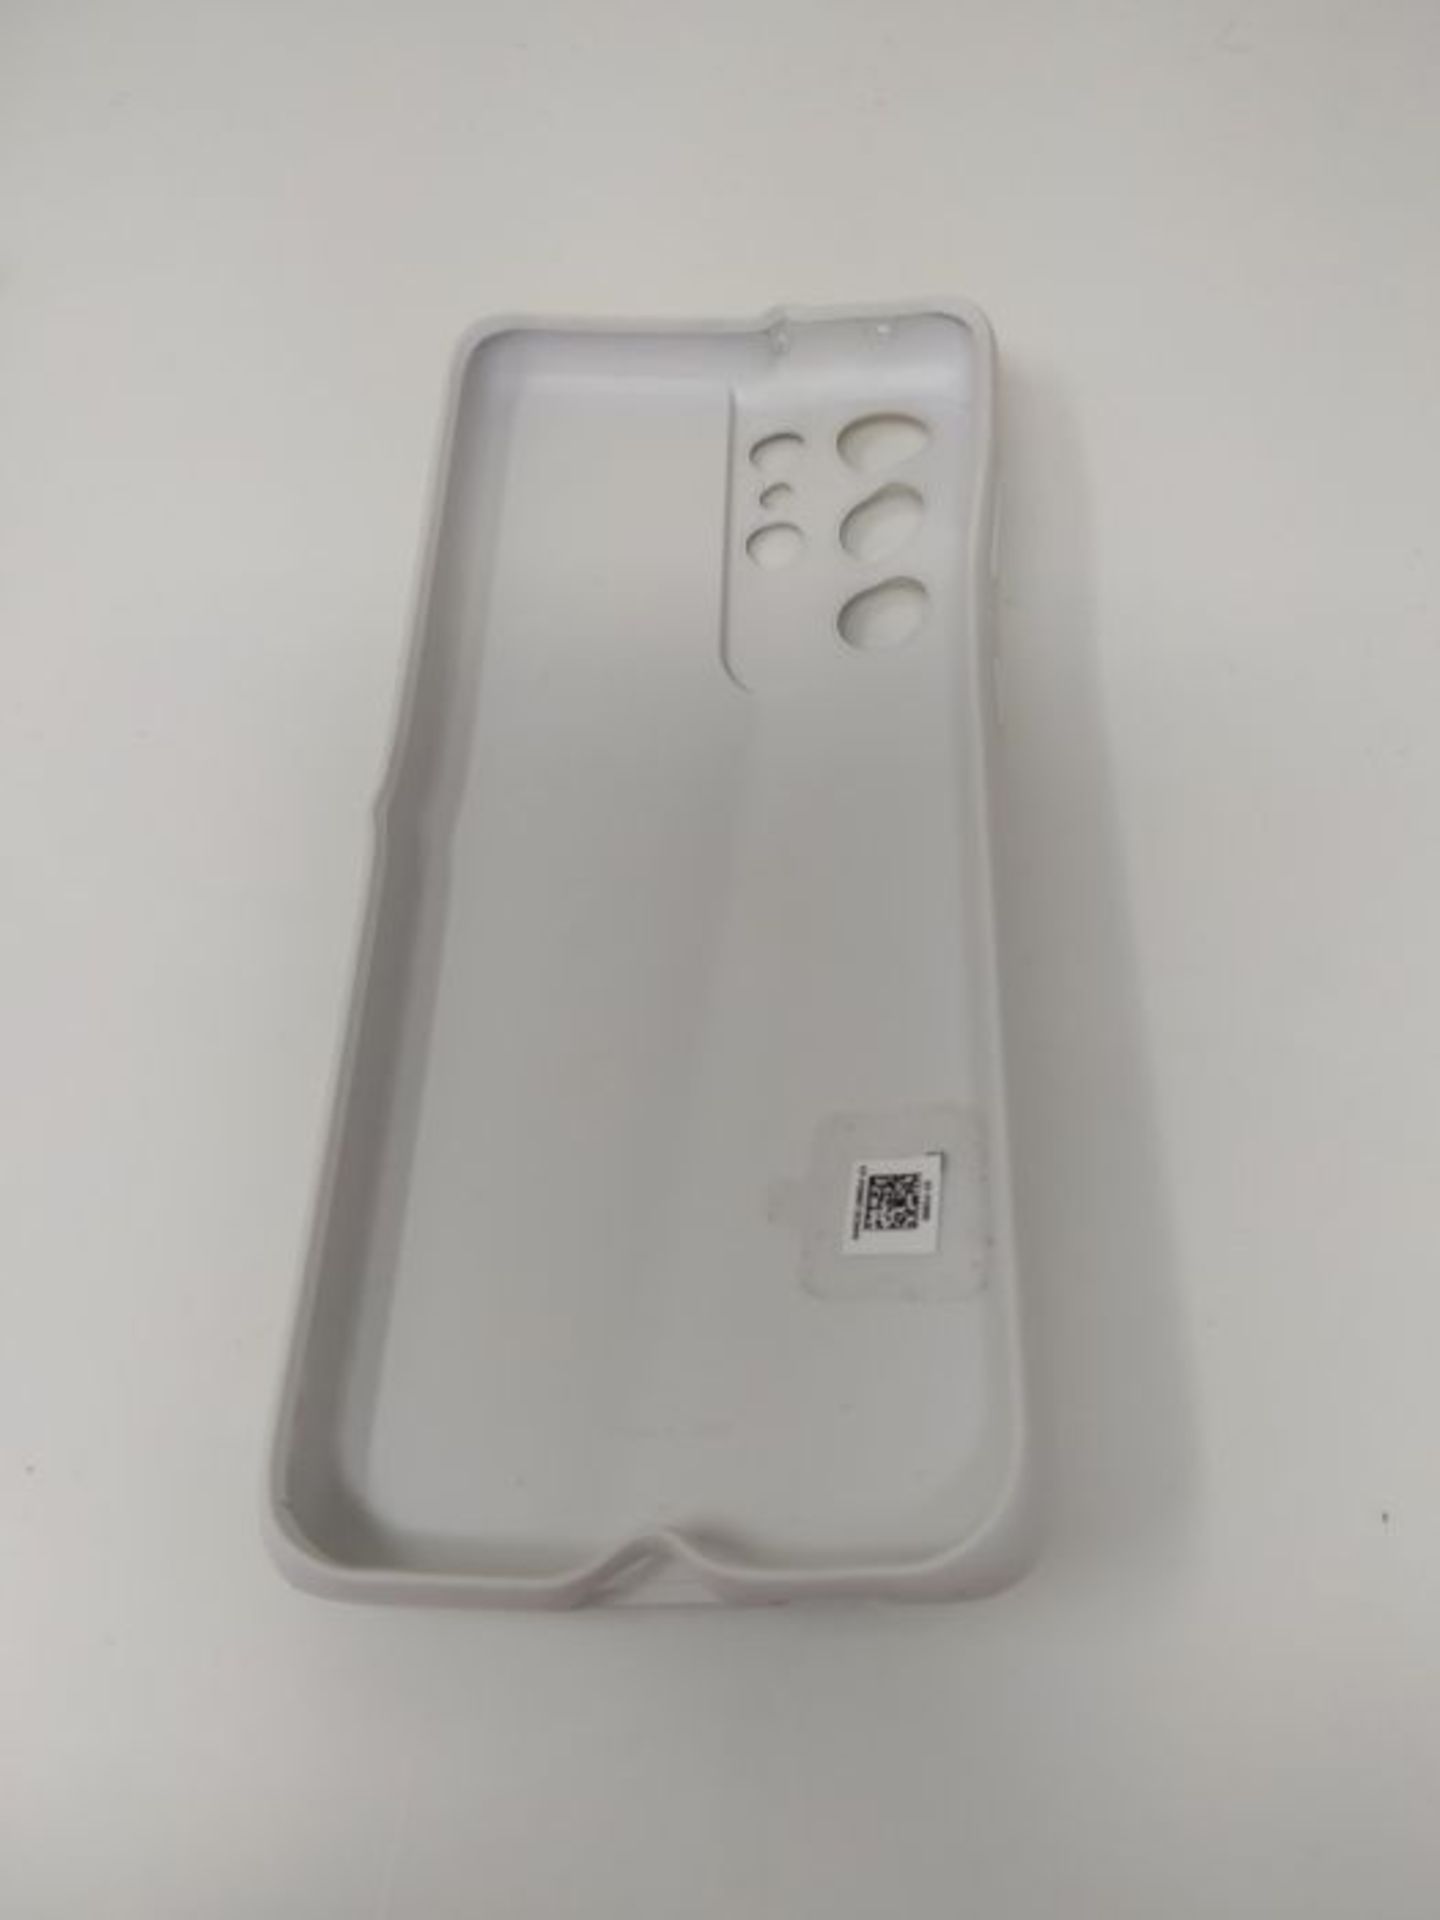 Samsung Galaxy S21 Ultra 5G Silicone Cover Light Gray - 6.8 inches - Image 4 of 4